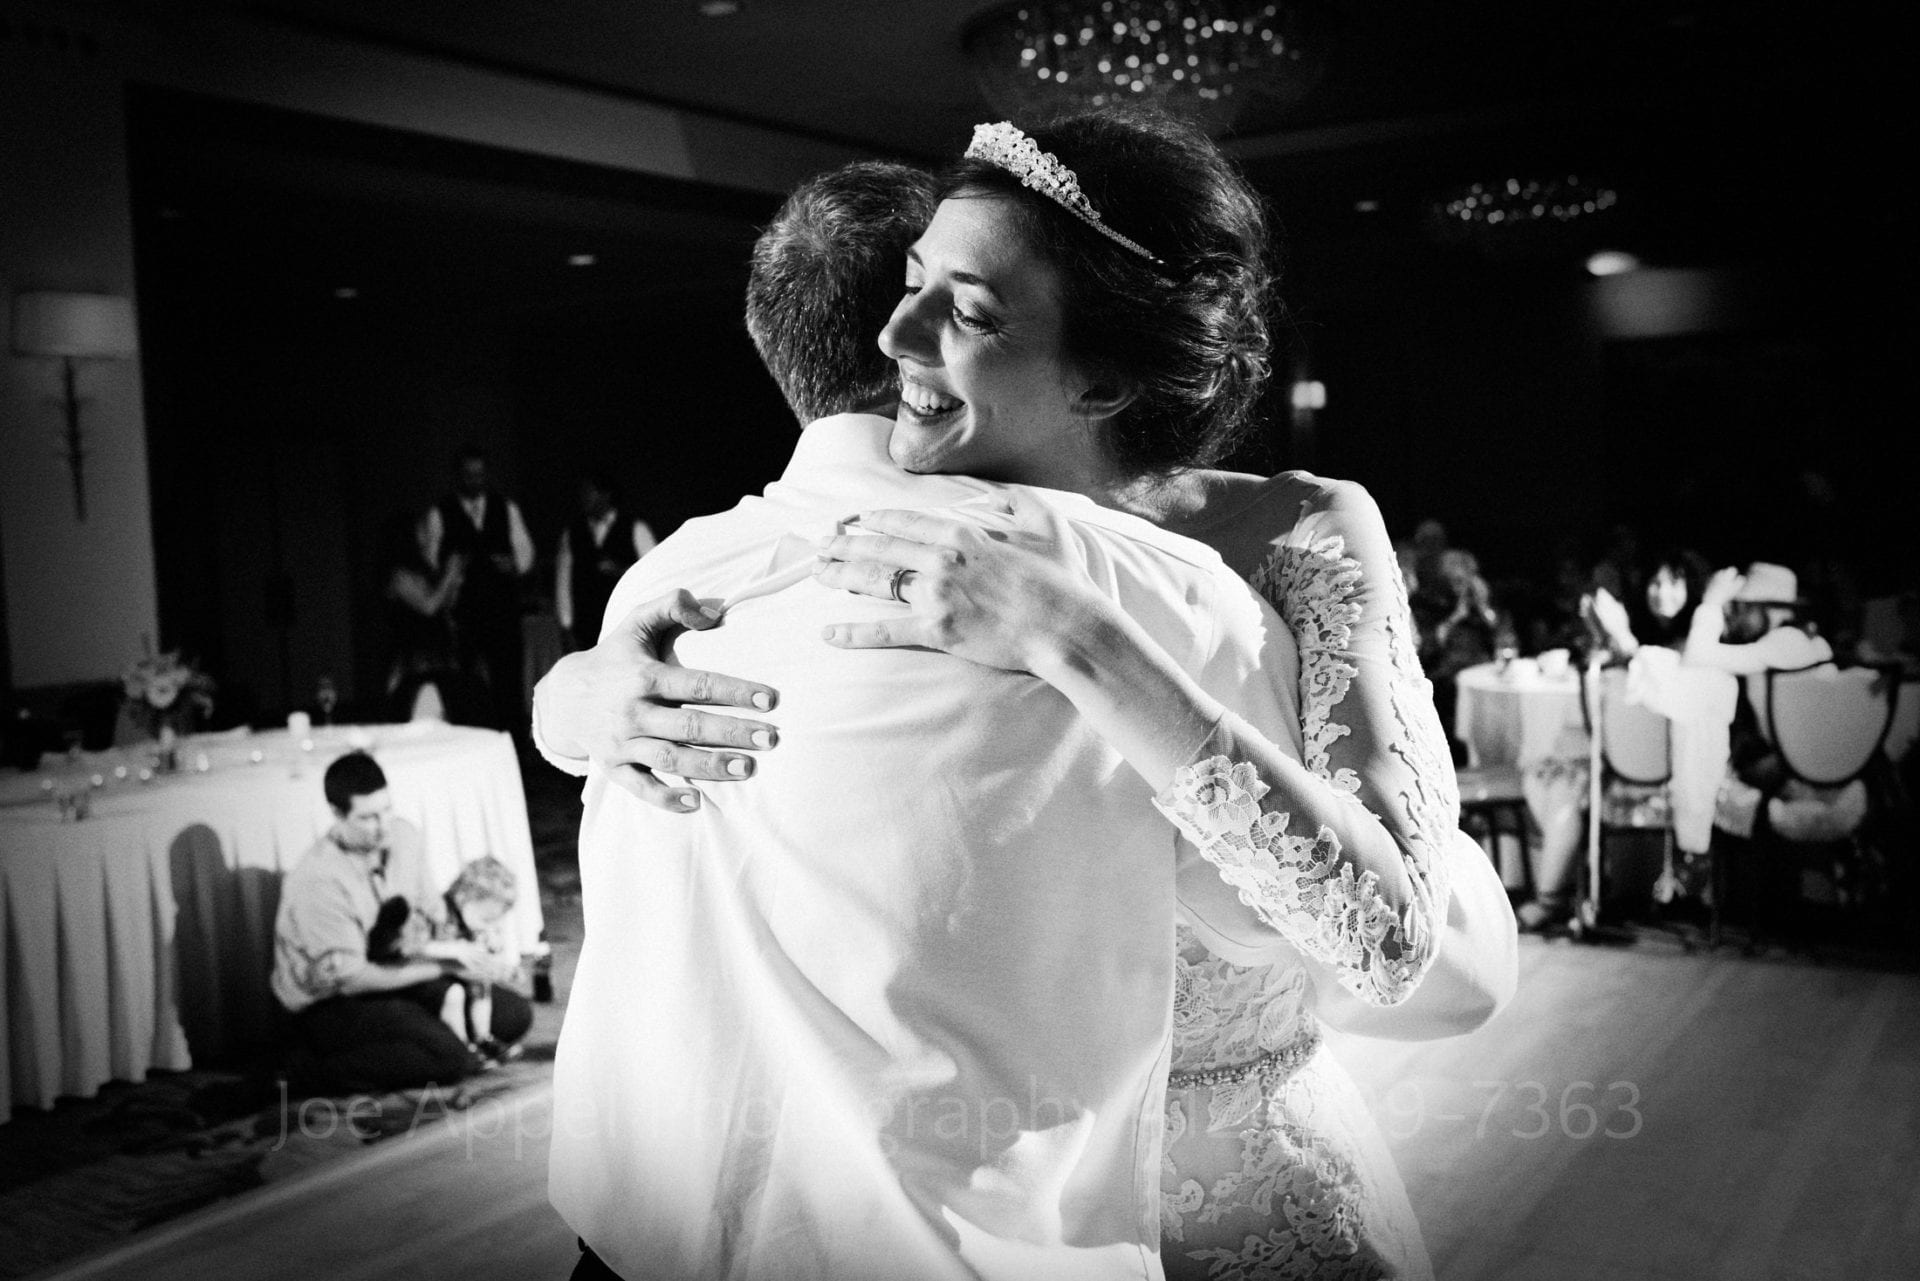 Bride smiles as she embraces her father at the conclusion of their dance.